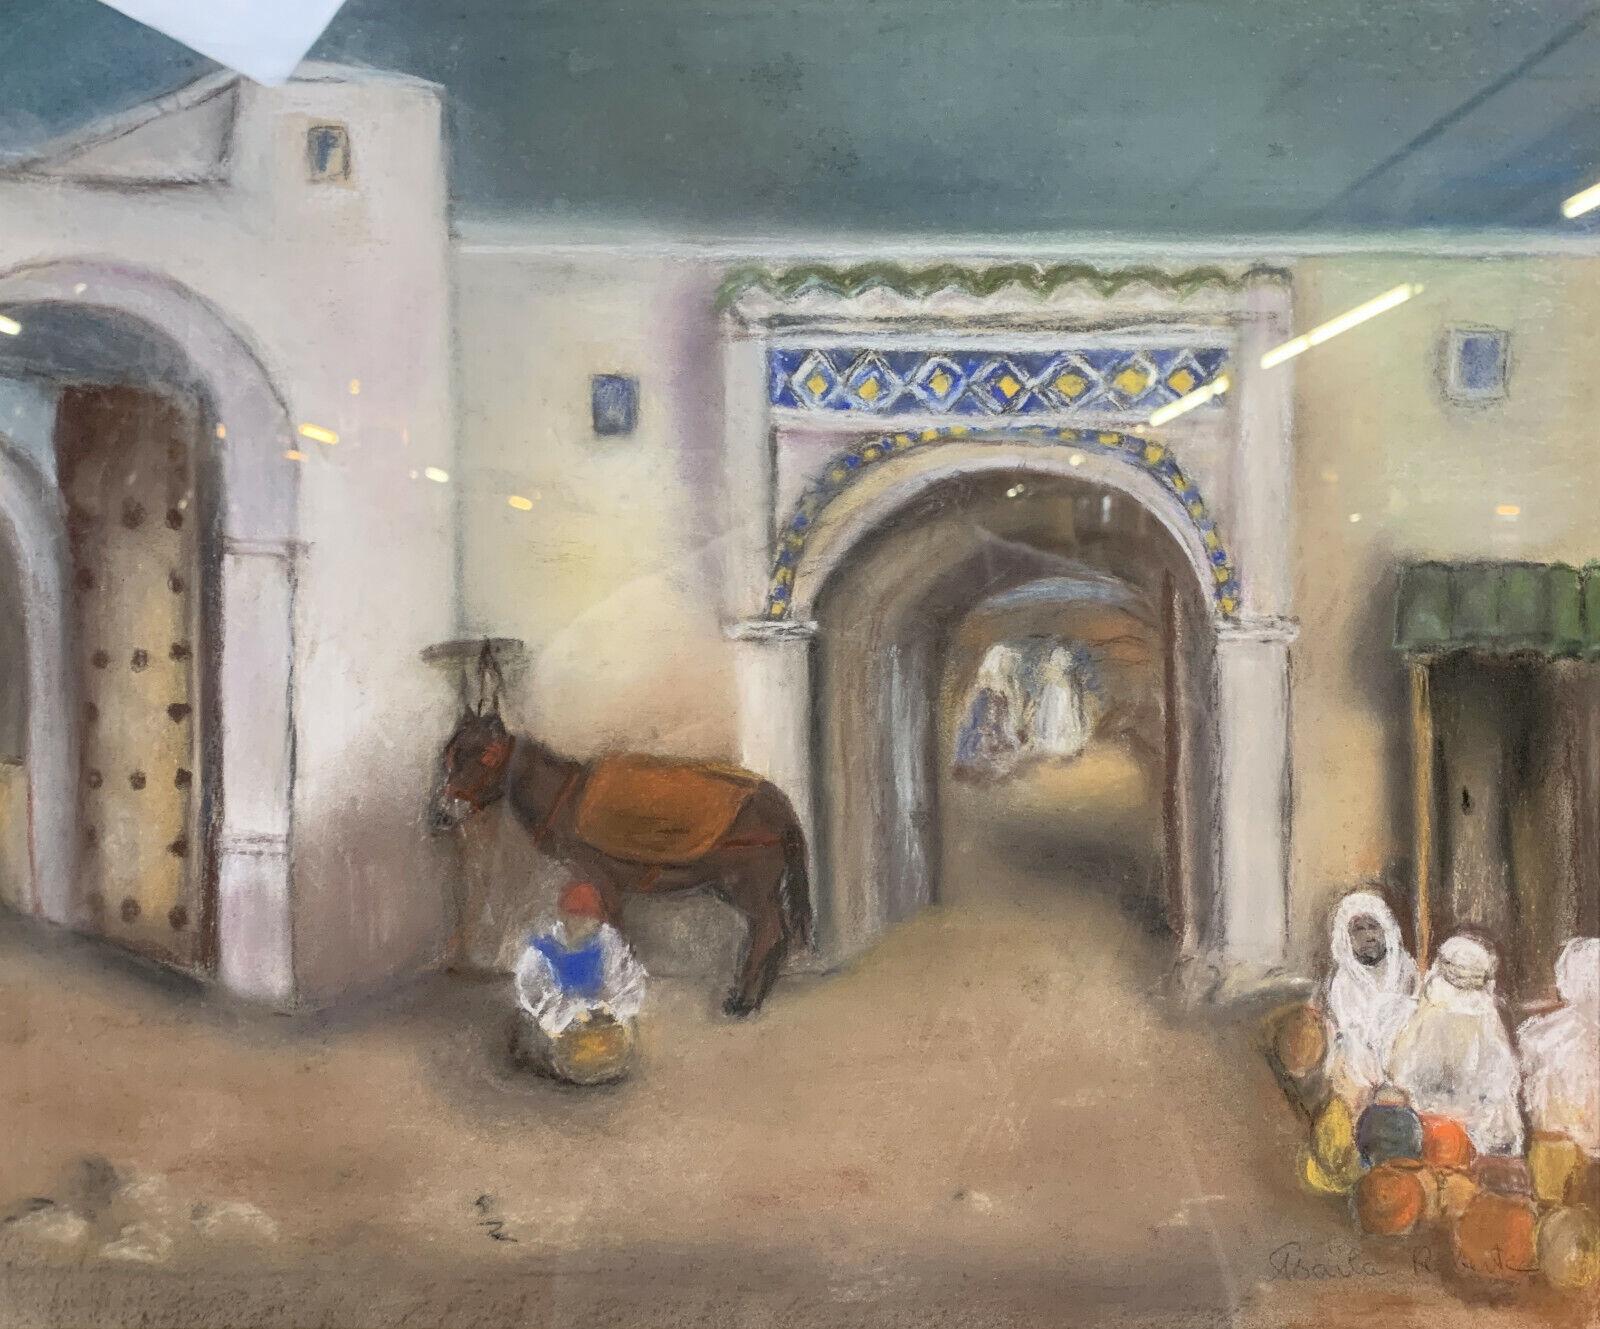 Immerse yourself in the vibrant atmosphere of a bustling Medina with this captivating watercolor, part of the Orientalist school of the 20th century. Signed by the artist Roberte, this artwork depicts an animated scene of a bustling Medina,